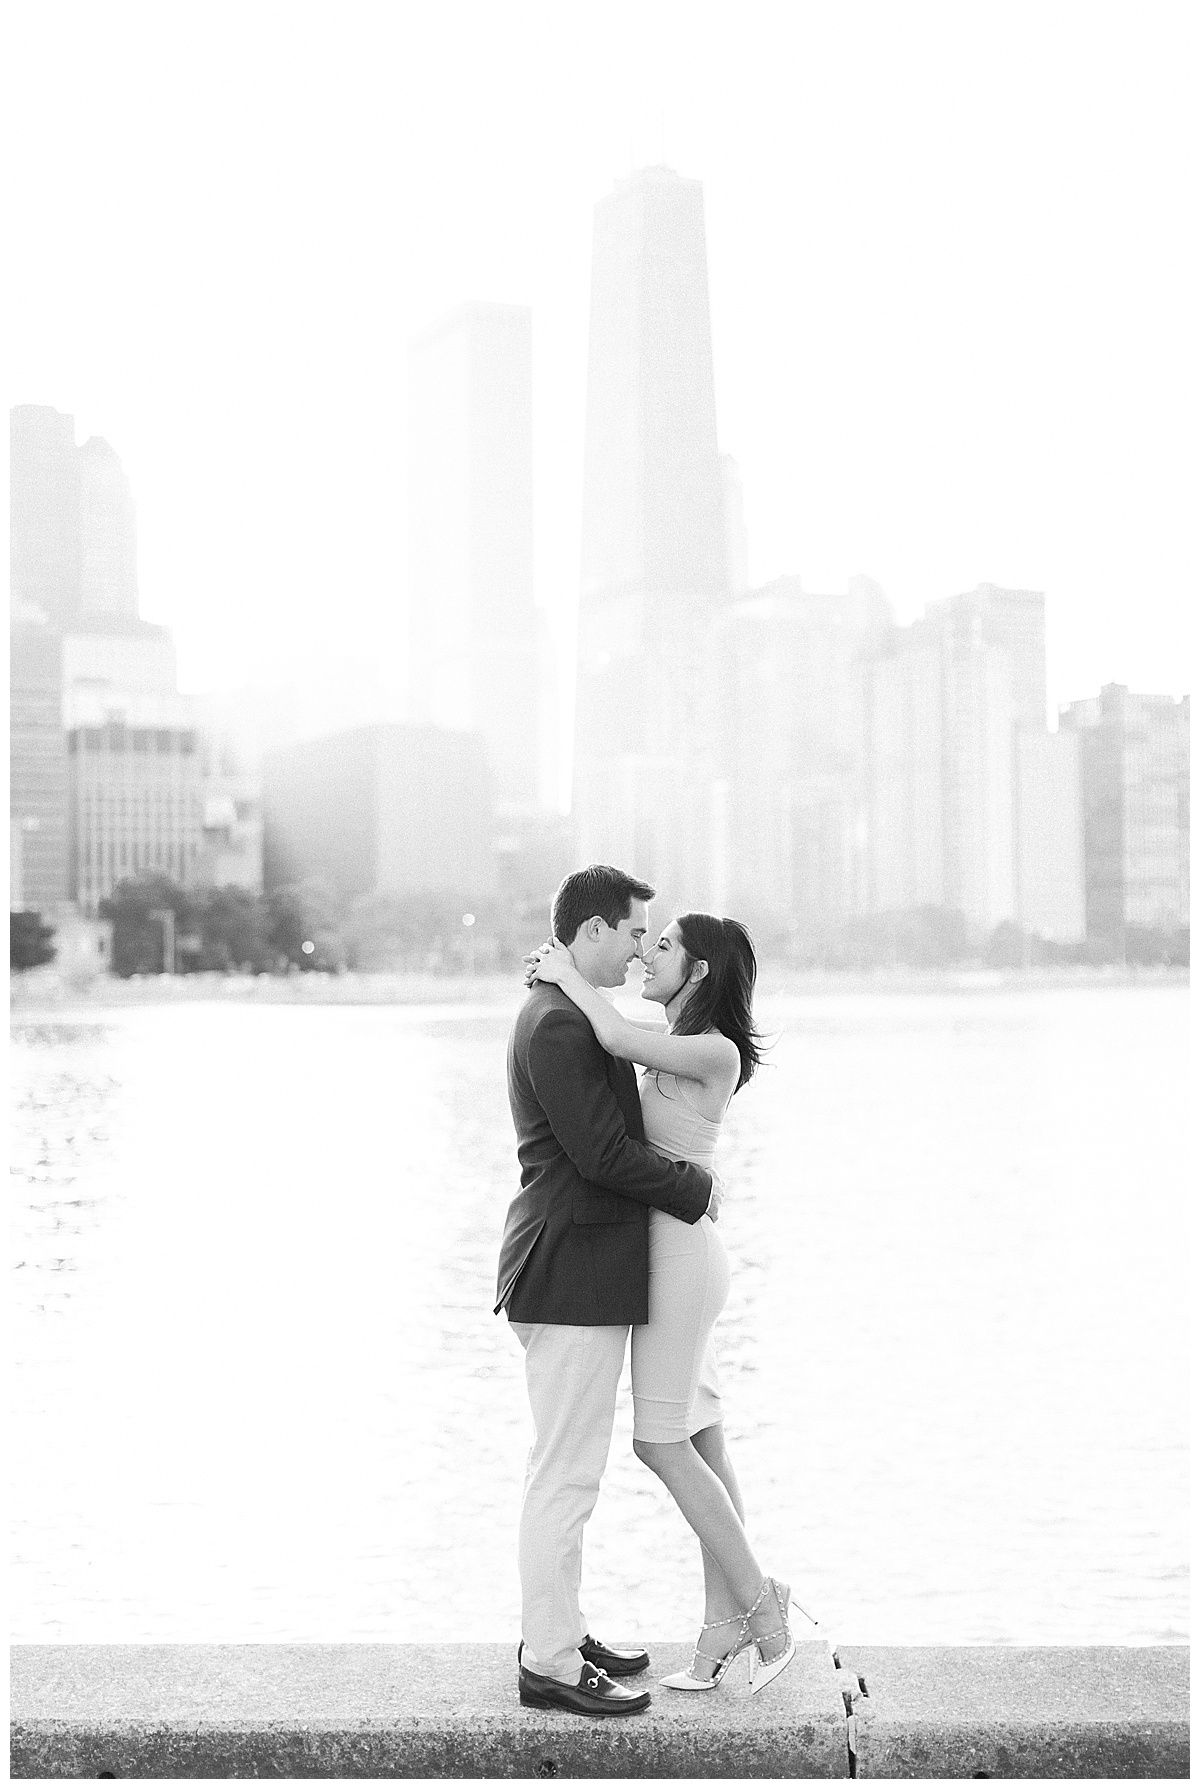 Chicago Engagement Photos at Olive Park, Olive Park Engagement, Milton Lee Olive Park, Olive Park Chicago, Chicago Illinois Engagement Photos, Chicago engagement photographer, Illinois engagement photographer, Lake Michigan engagement photos, chicago engagement photo ideas, engagement photo poses, downtown chicago engagement photos, where is olive park, chicago skyline engagement pictures